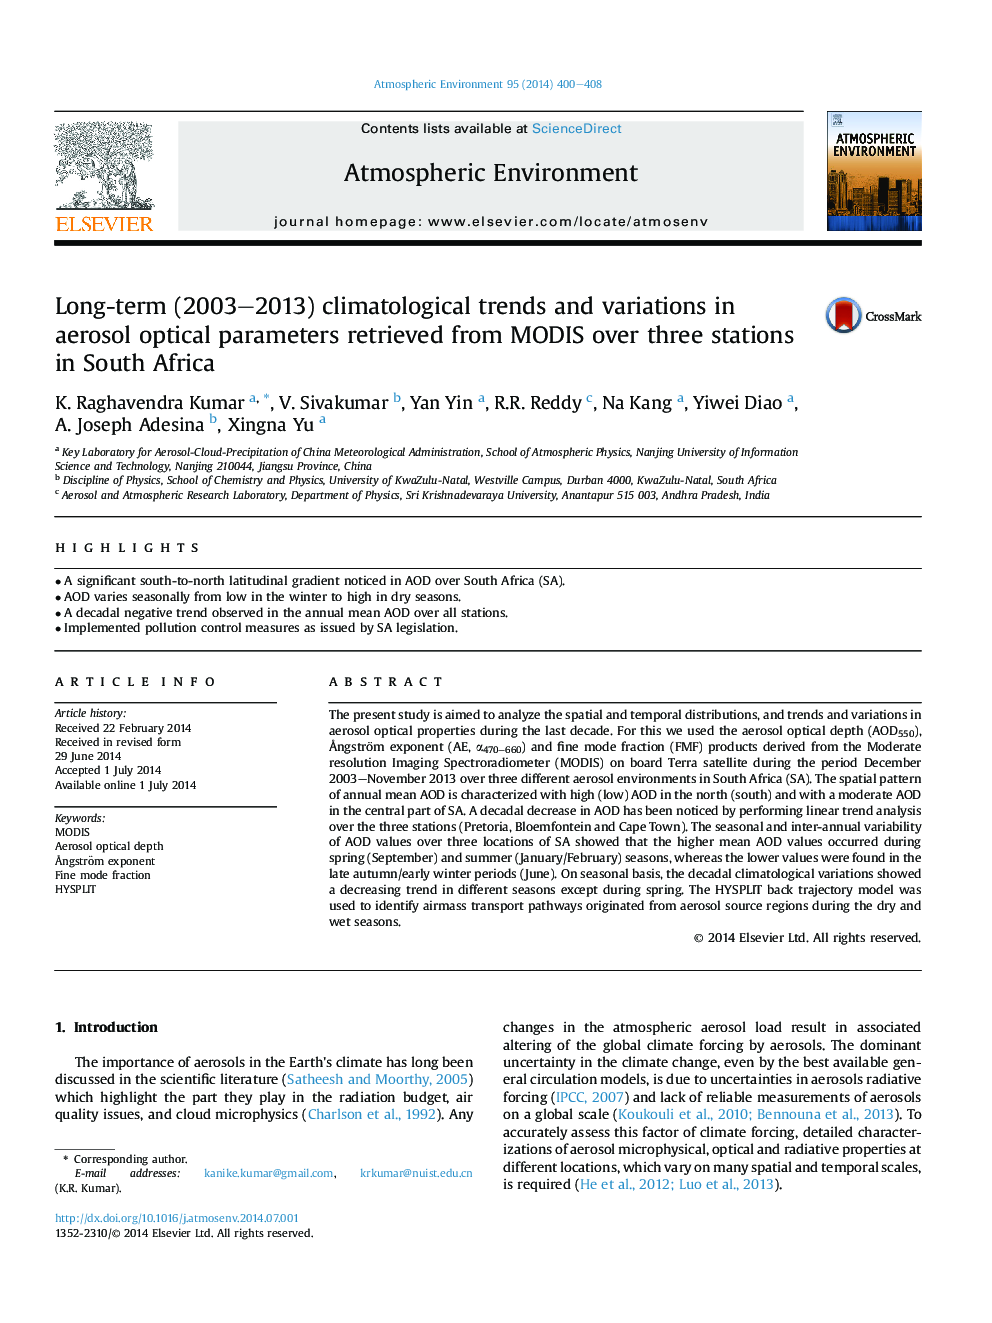 Long-term (2003-2013) climatological trends and variations in aerosol optical parameters retrieved from MODIS over three stations in South Africa